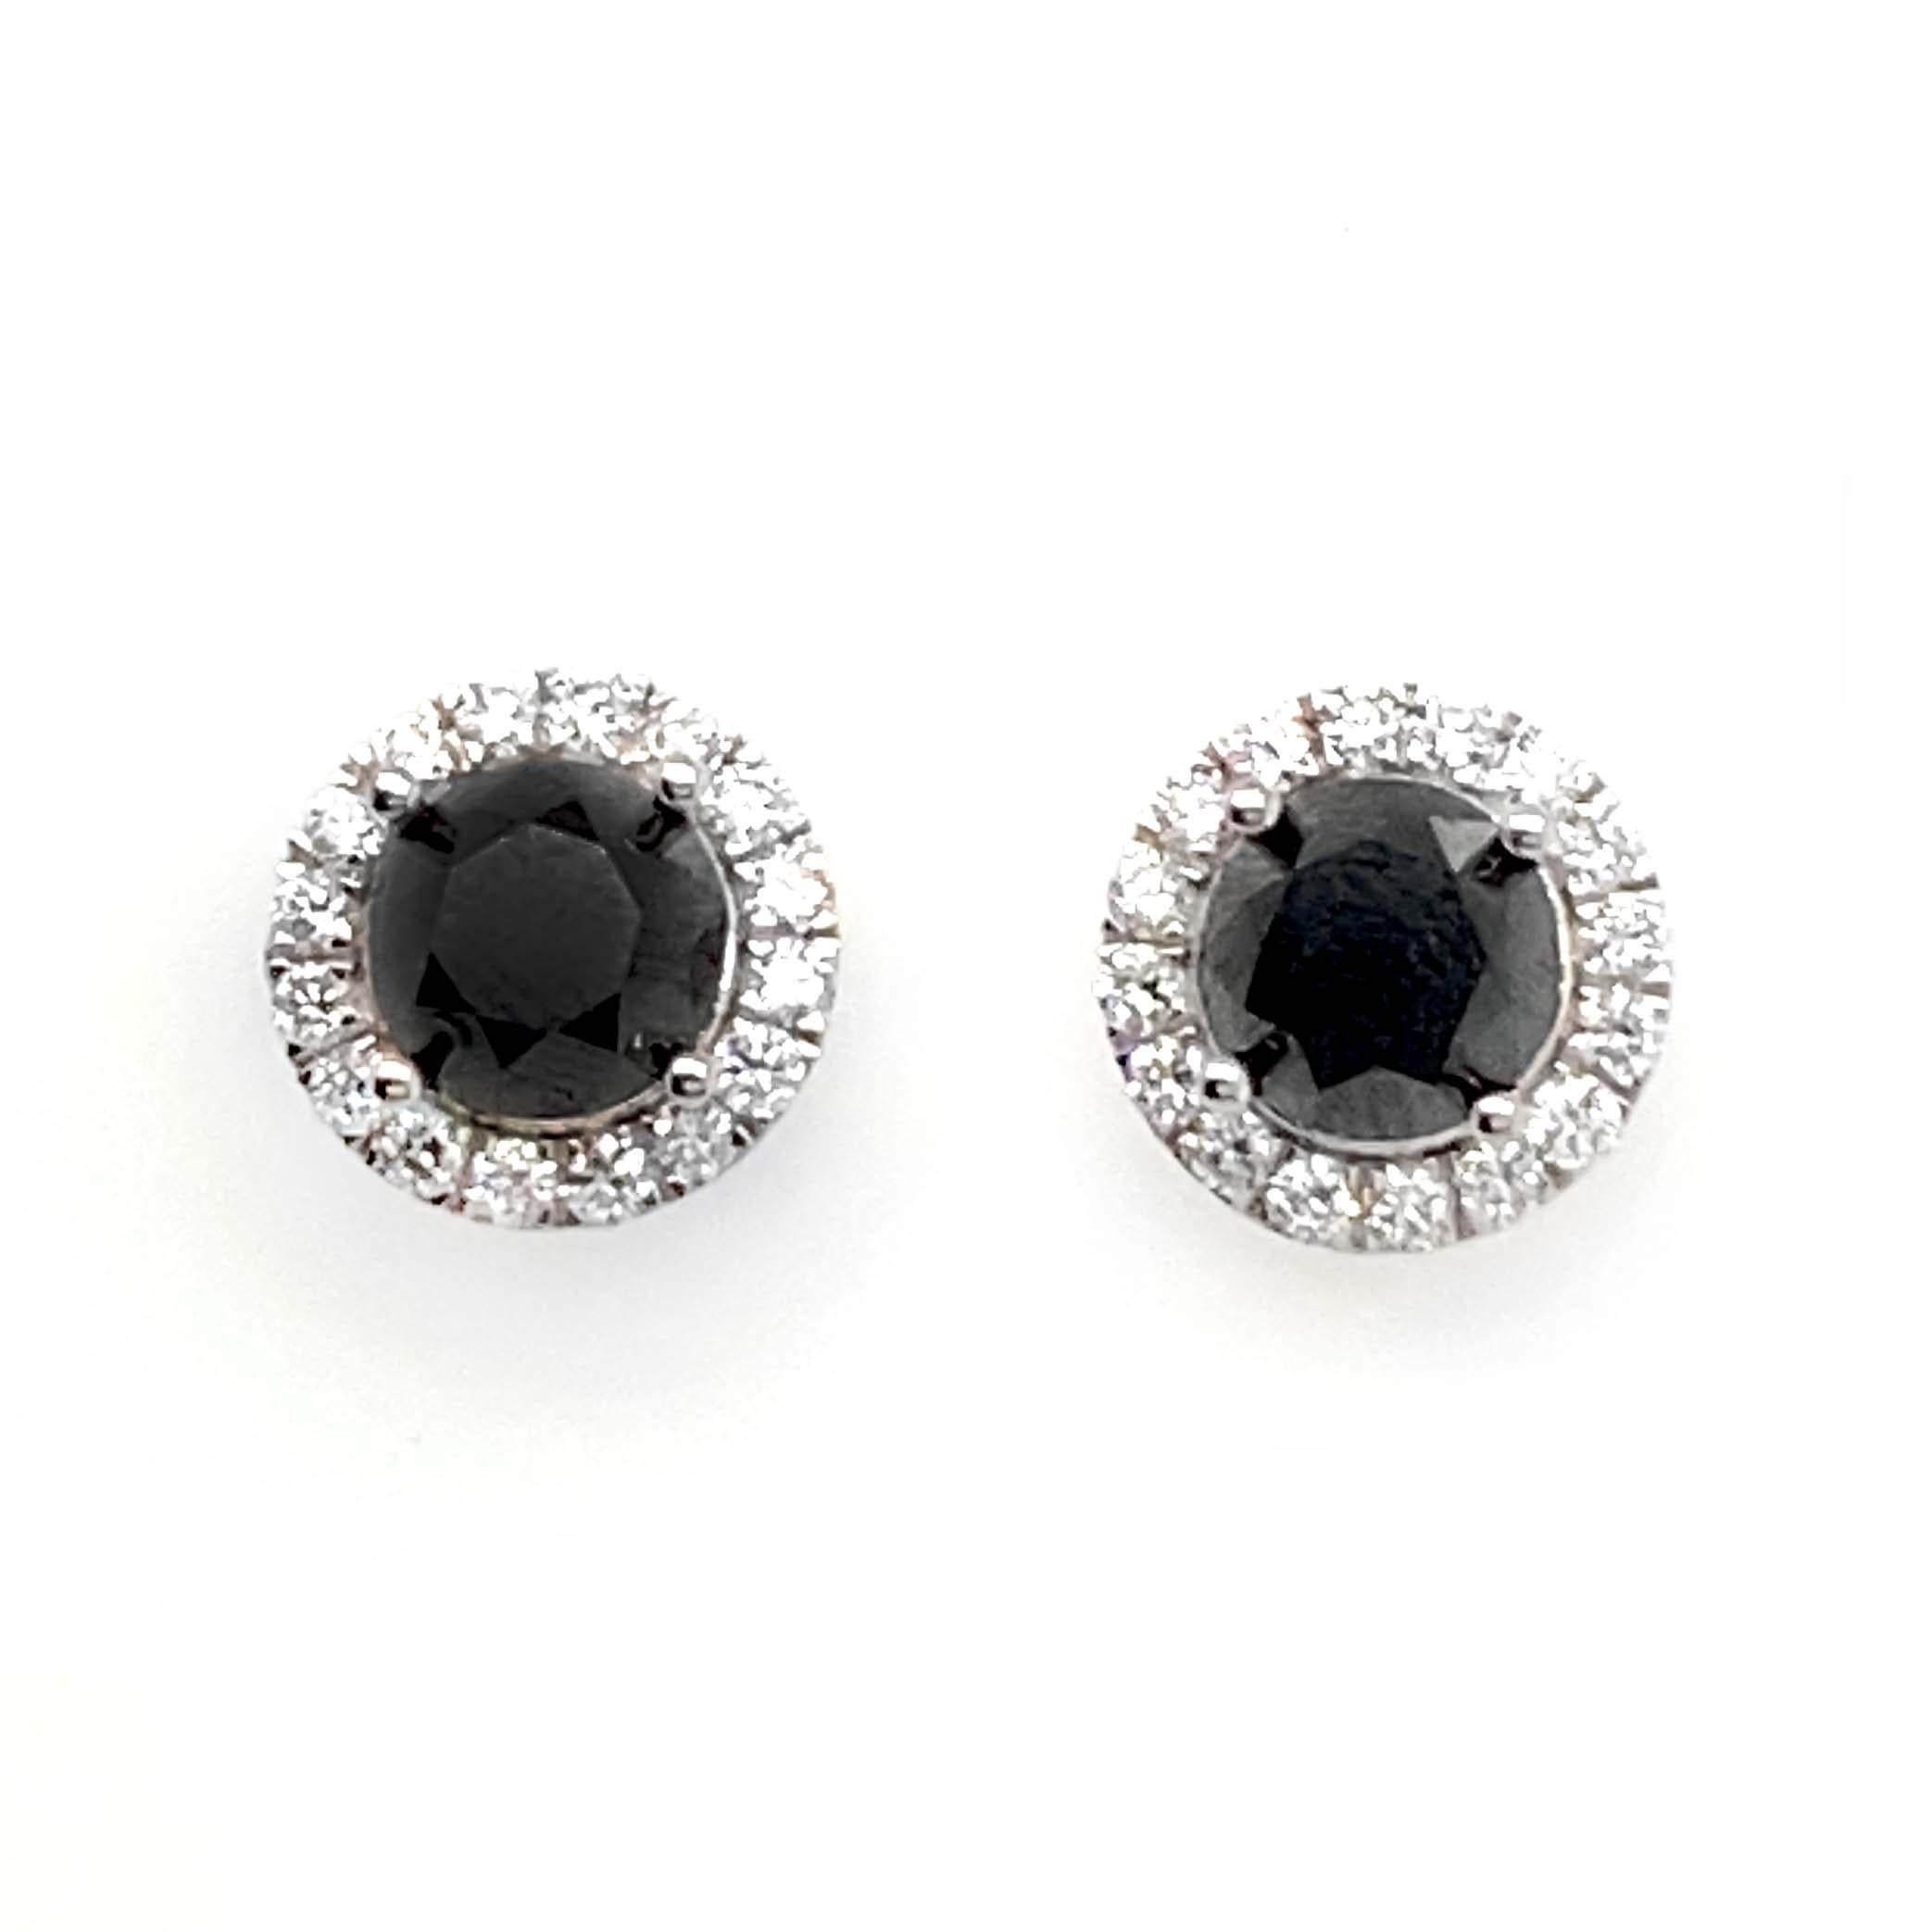 4 Carat Black Diamond Earring Studs In Good Condition For Sale In Carlsbad, CA